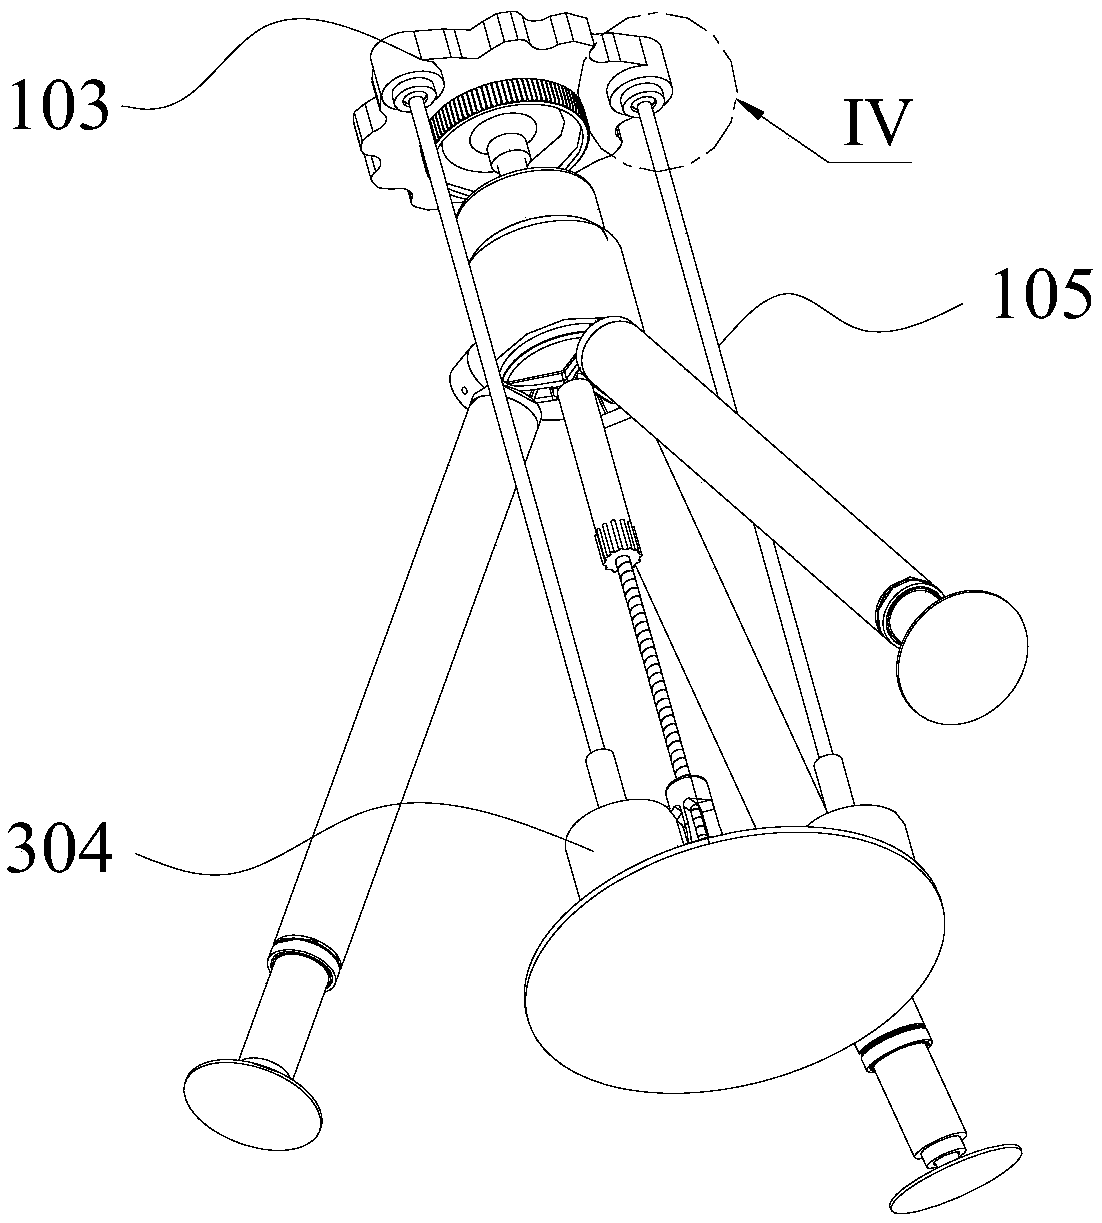 A tripod and photographic device